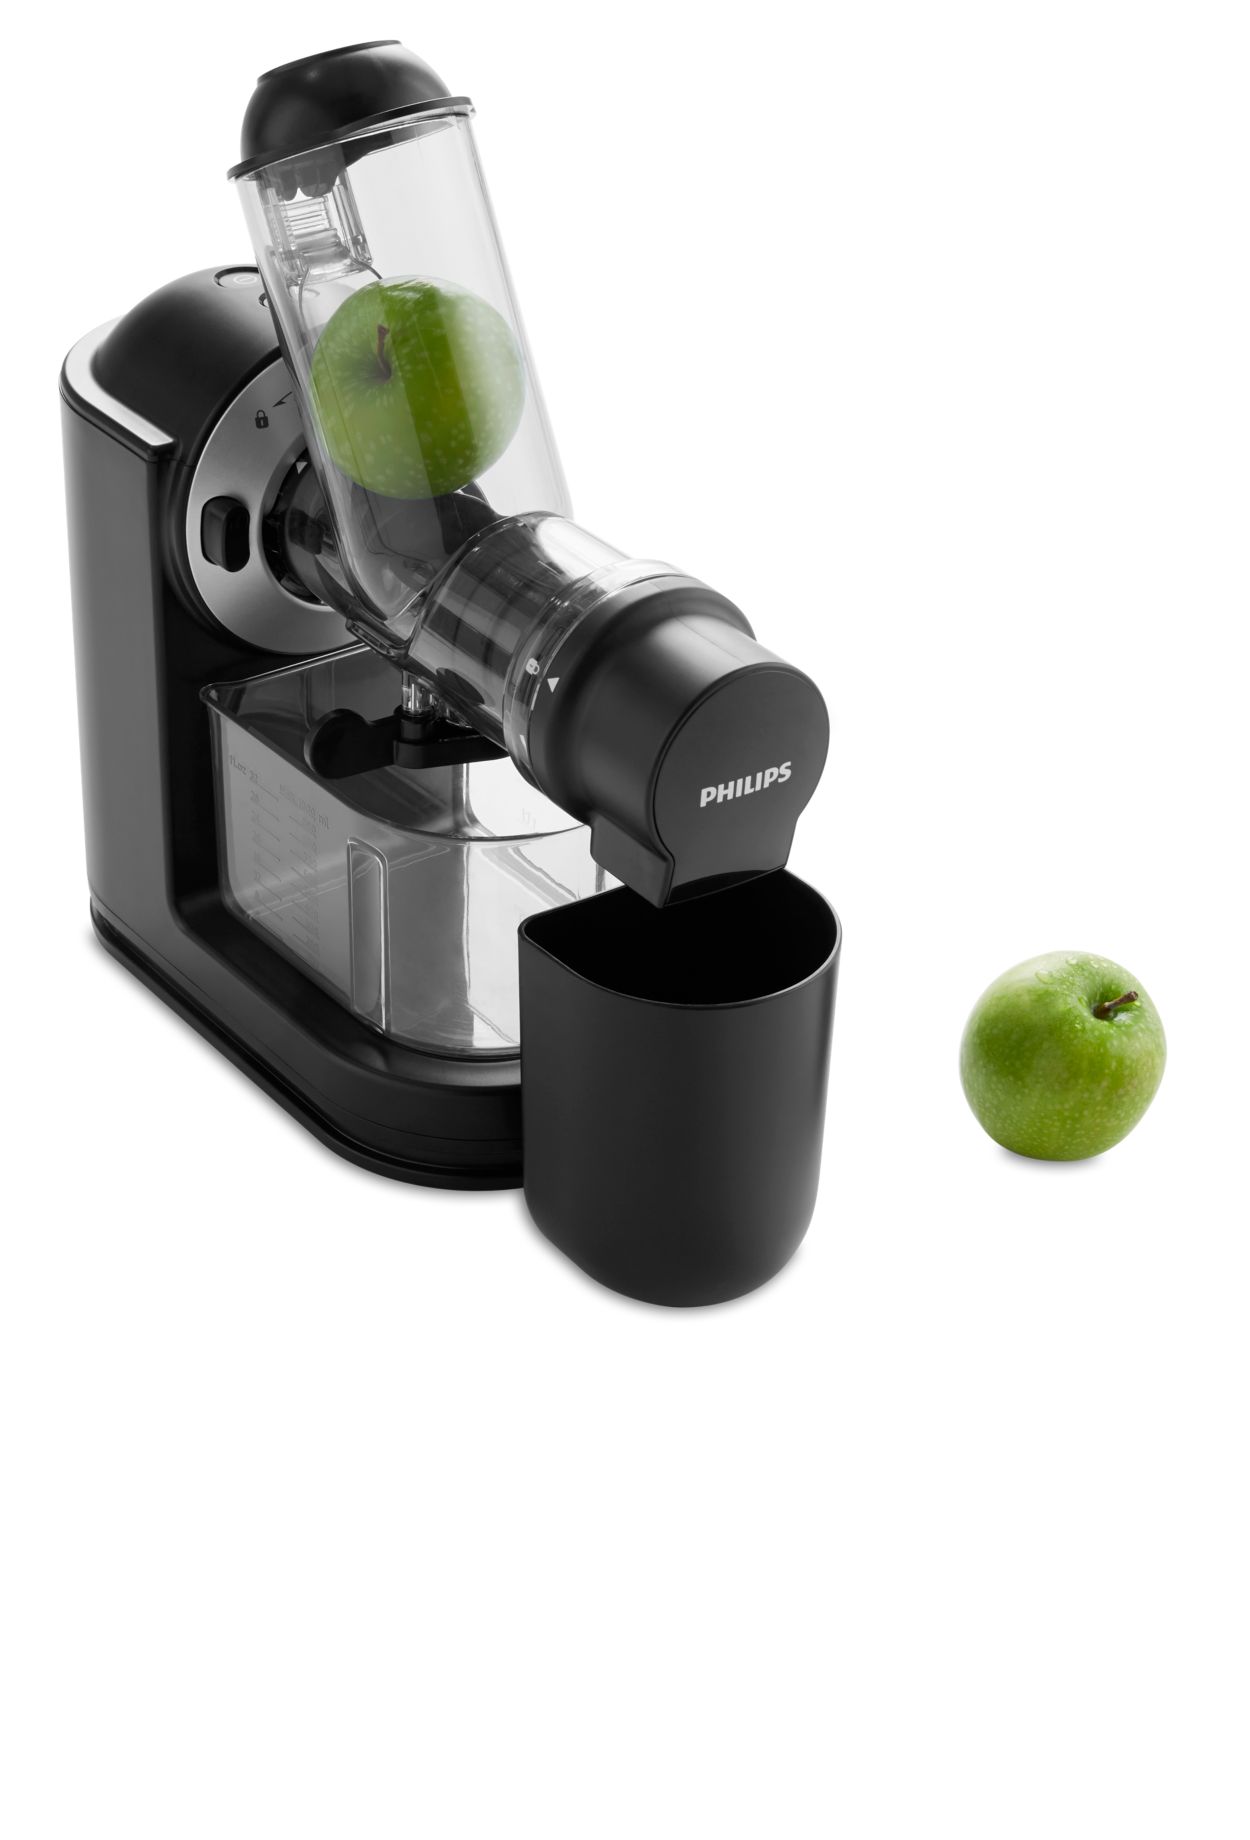 Viva Collection Slow HR1889/70 | Juicer Philips